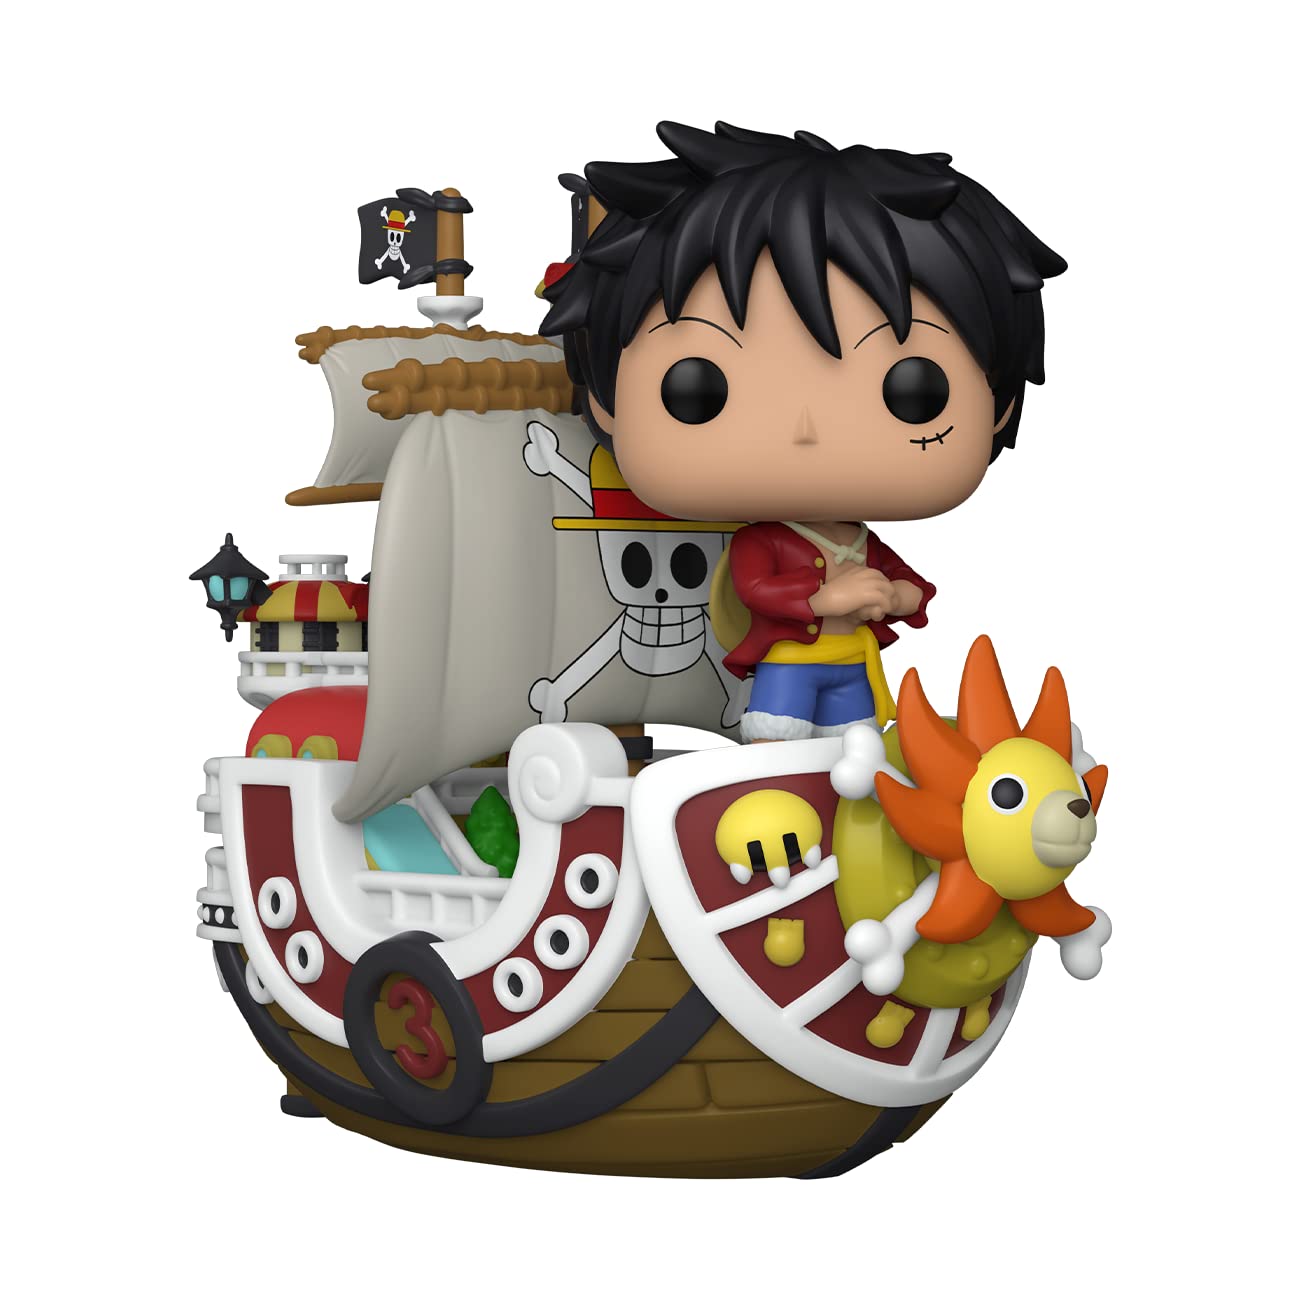 Funko POP! Rides Animation One Piece Luffy With Thousand Sunny #114 Winter Convention Exclusive